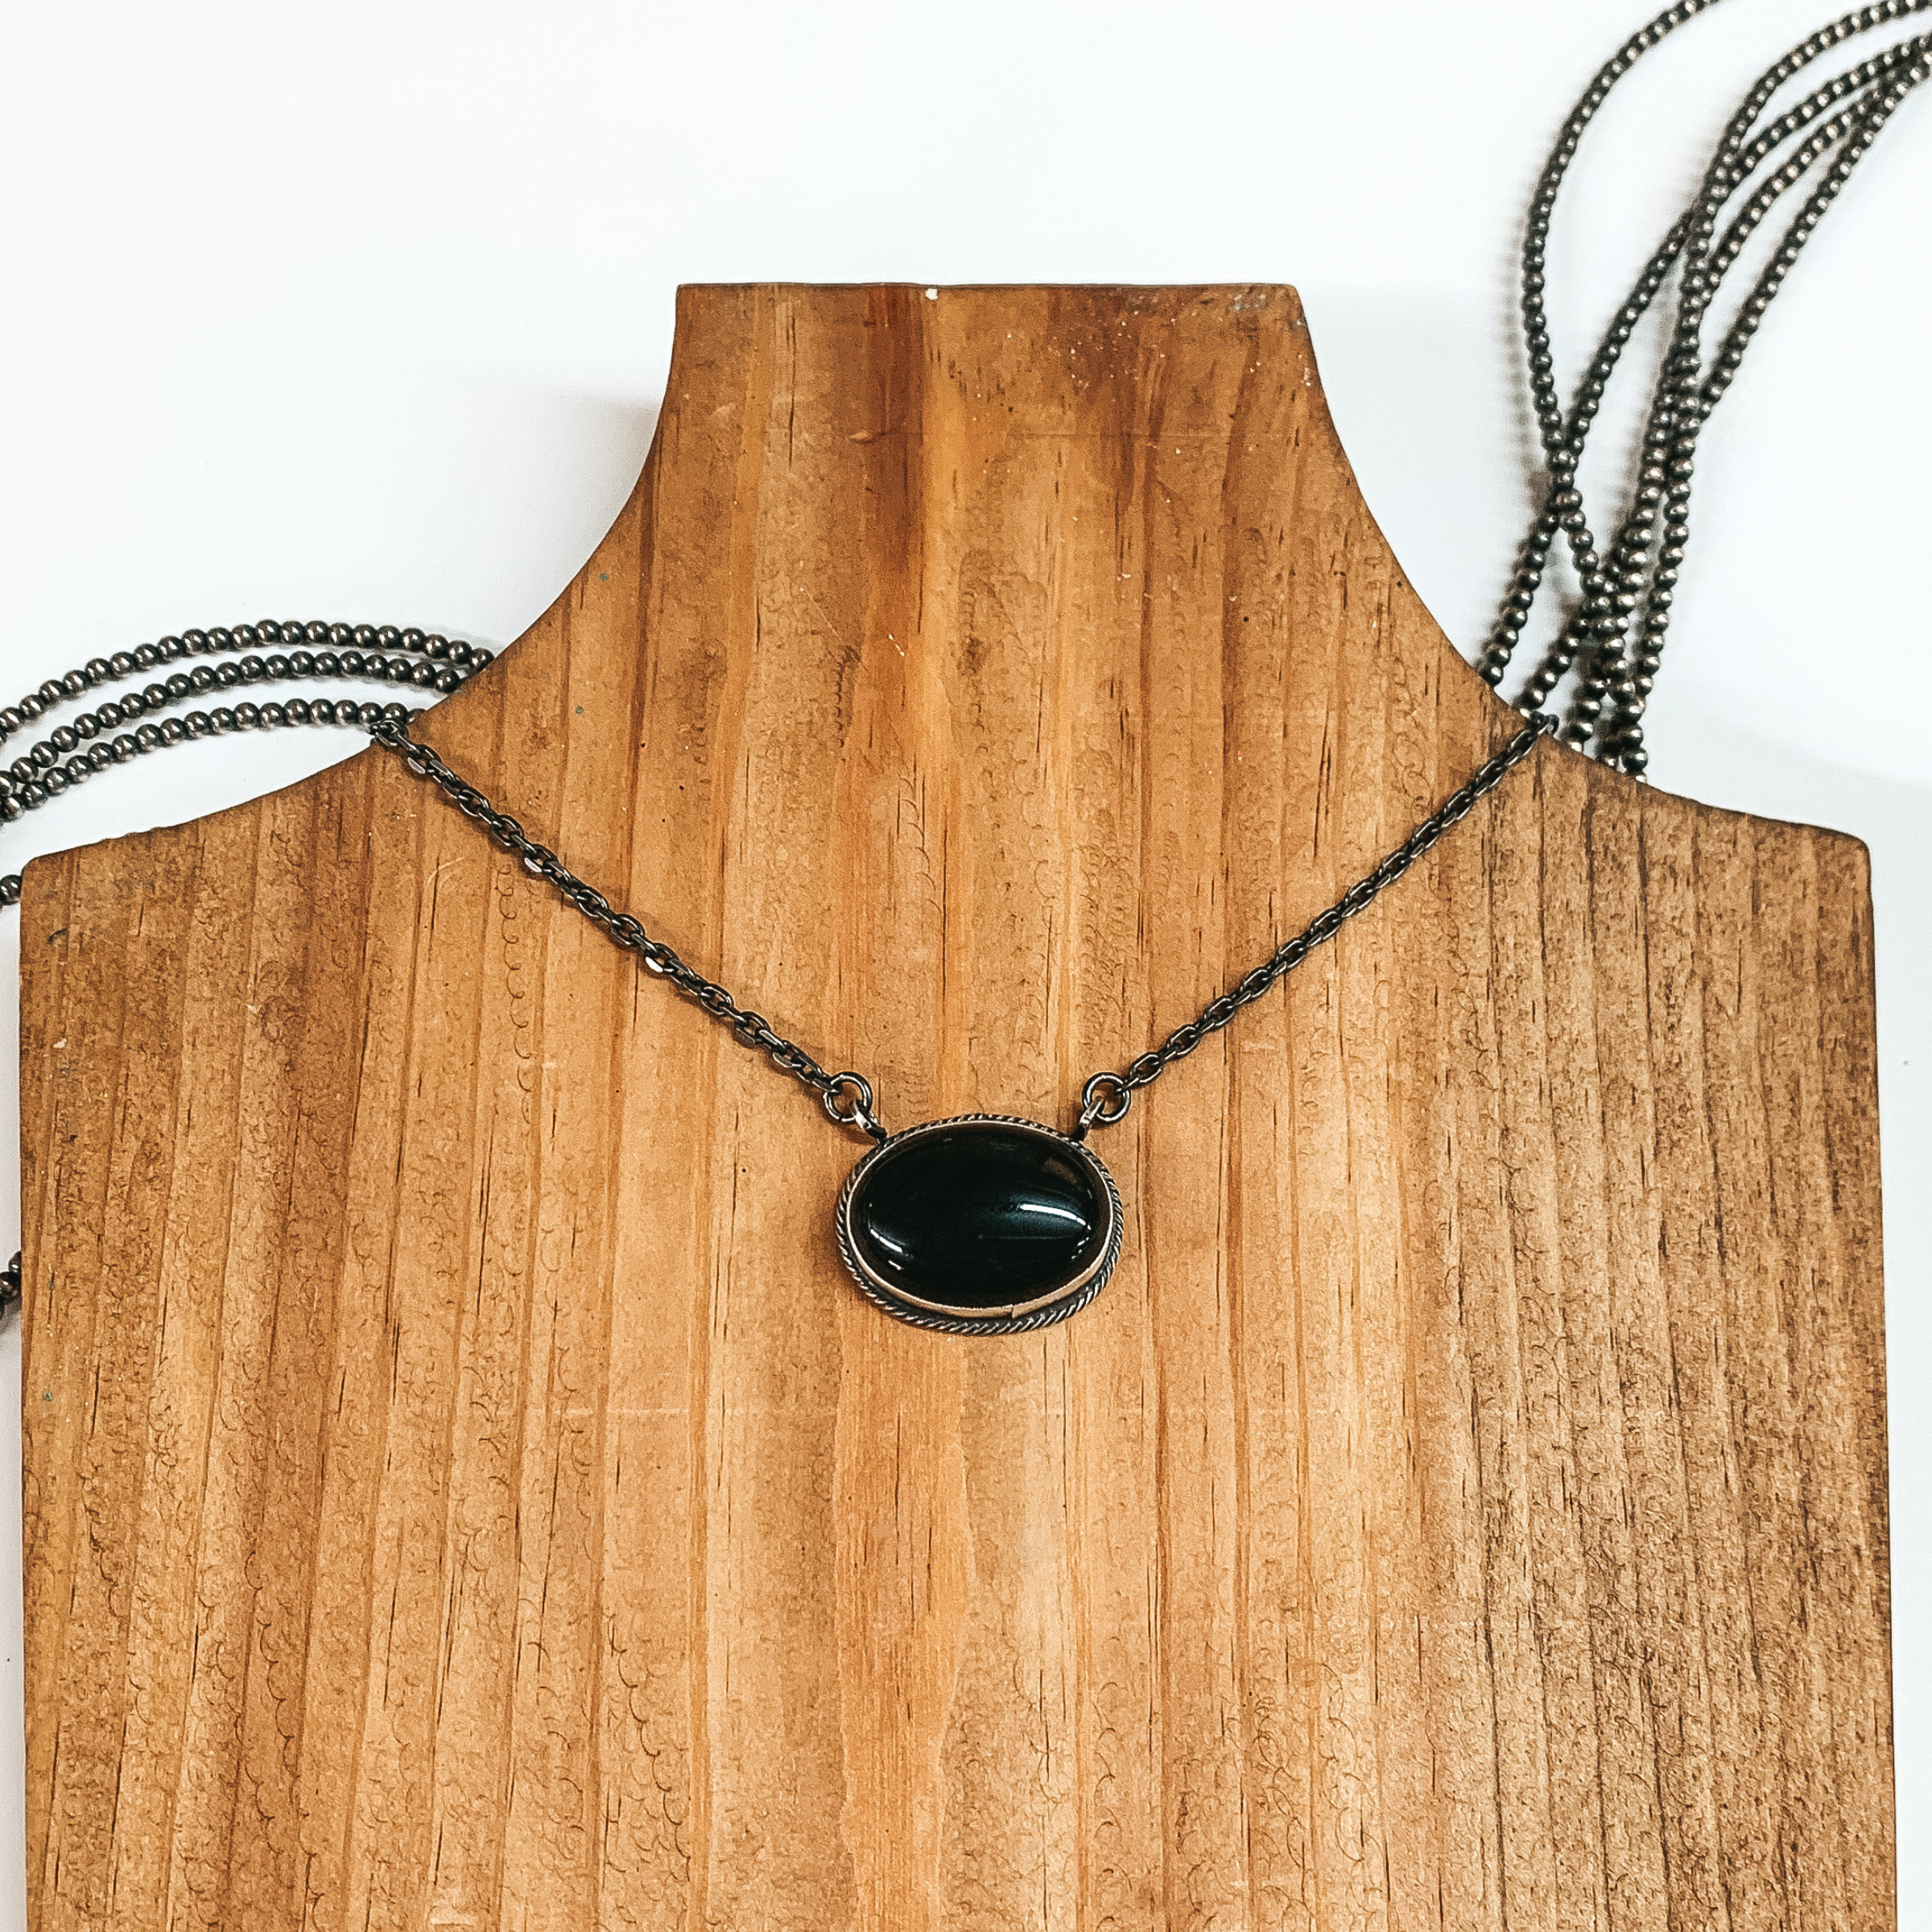 Silver chain necklace with an oval black stone pendant. This necklace is pictured on a wood block on a white background. 